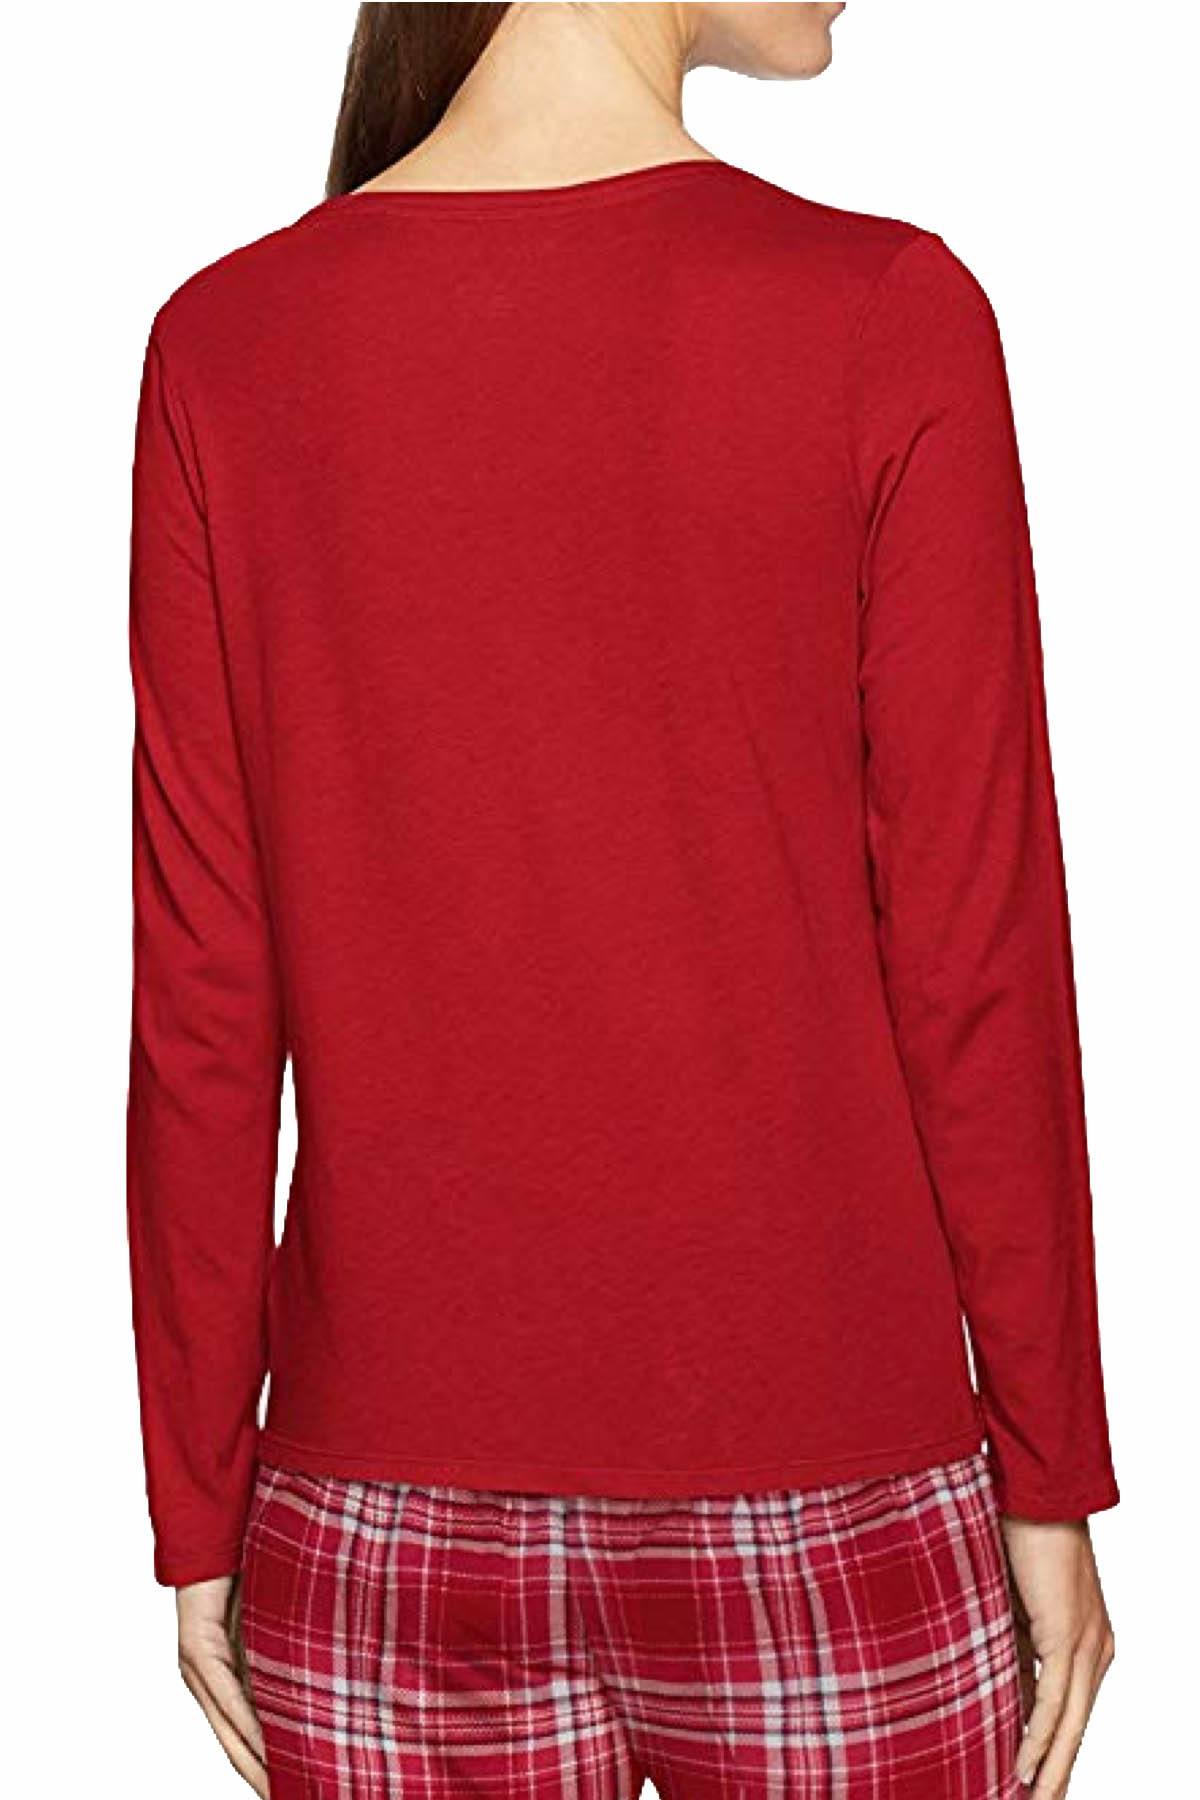 Nautica Red Cotton-Blend V-Neck Lounge Top